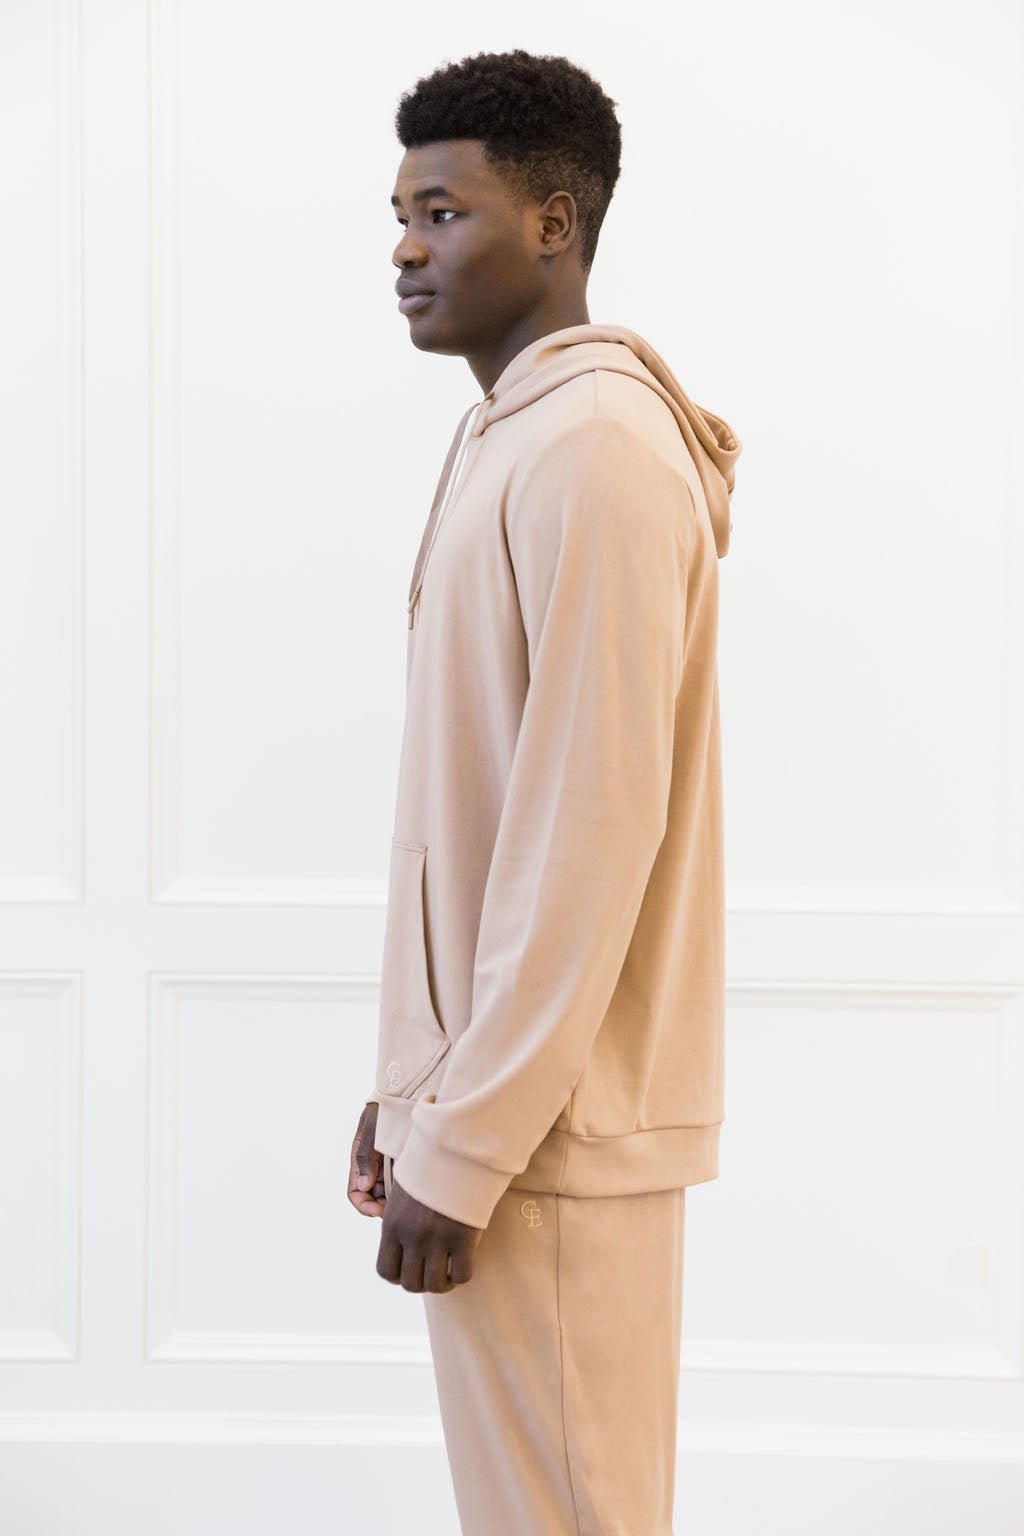 TImber Bamboo Hoodie worn by man standing in front of white background.